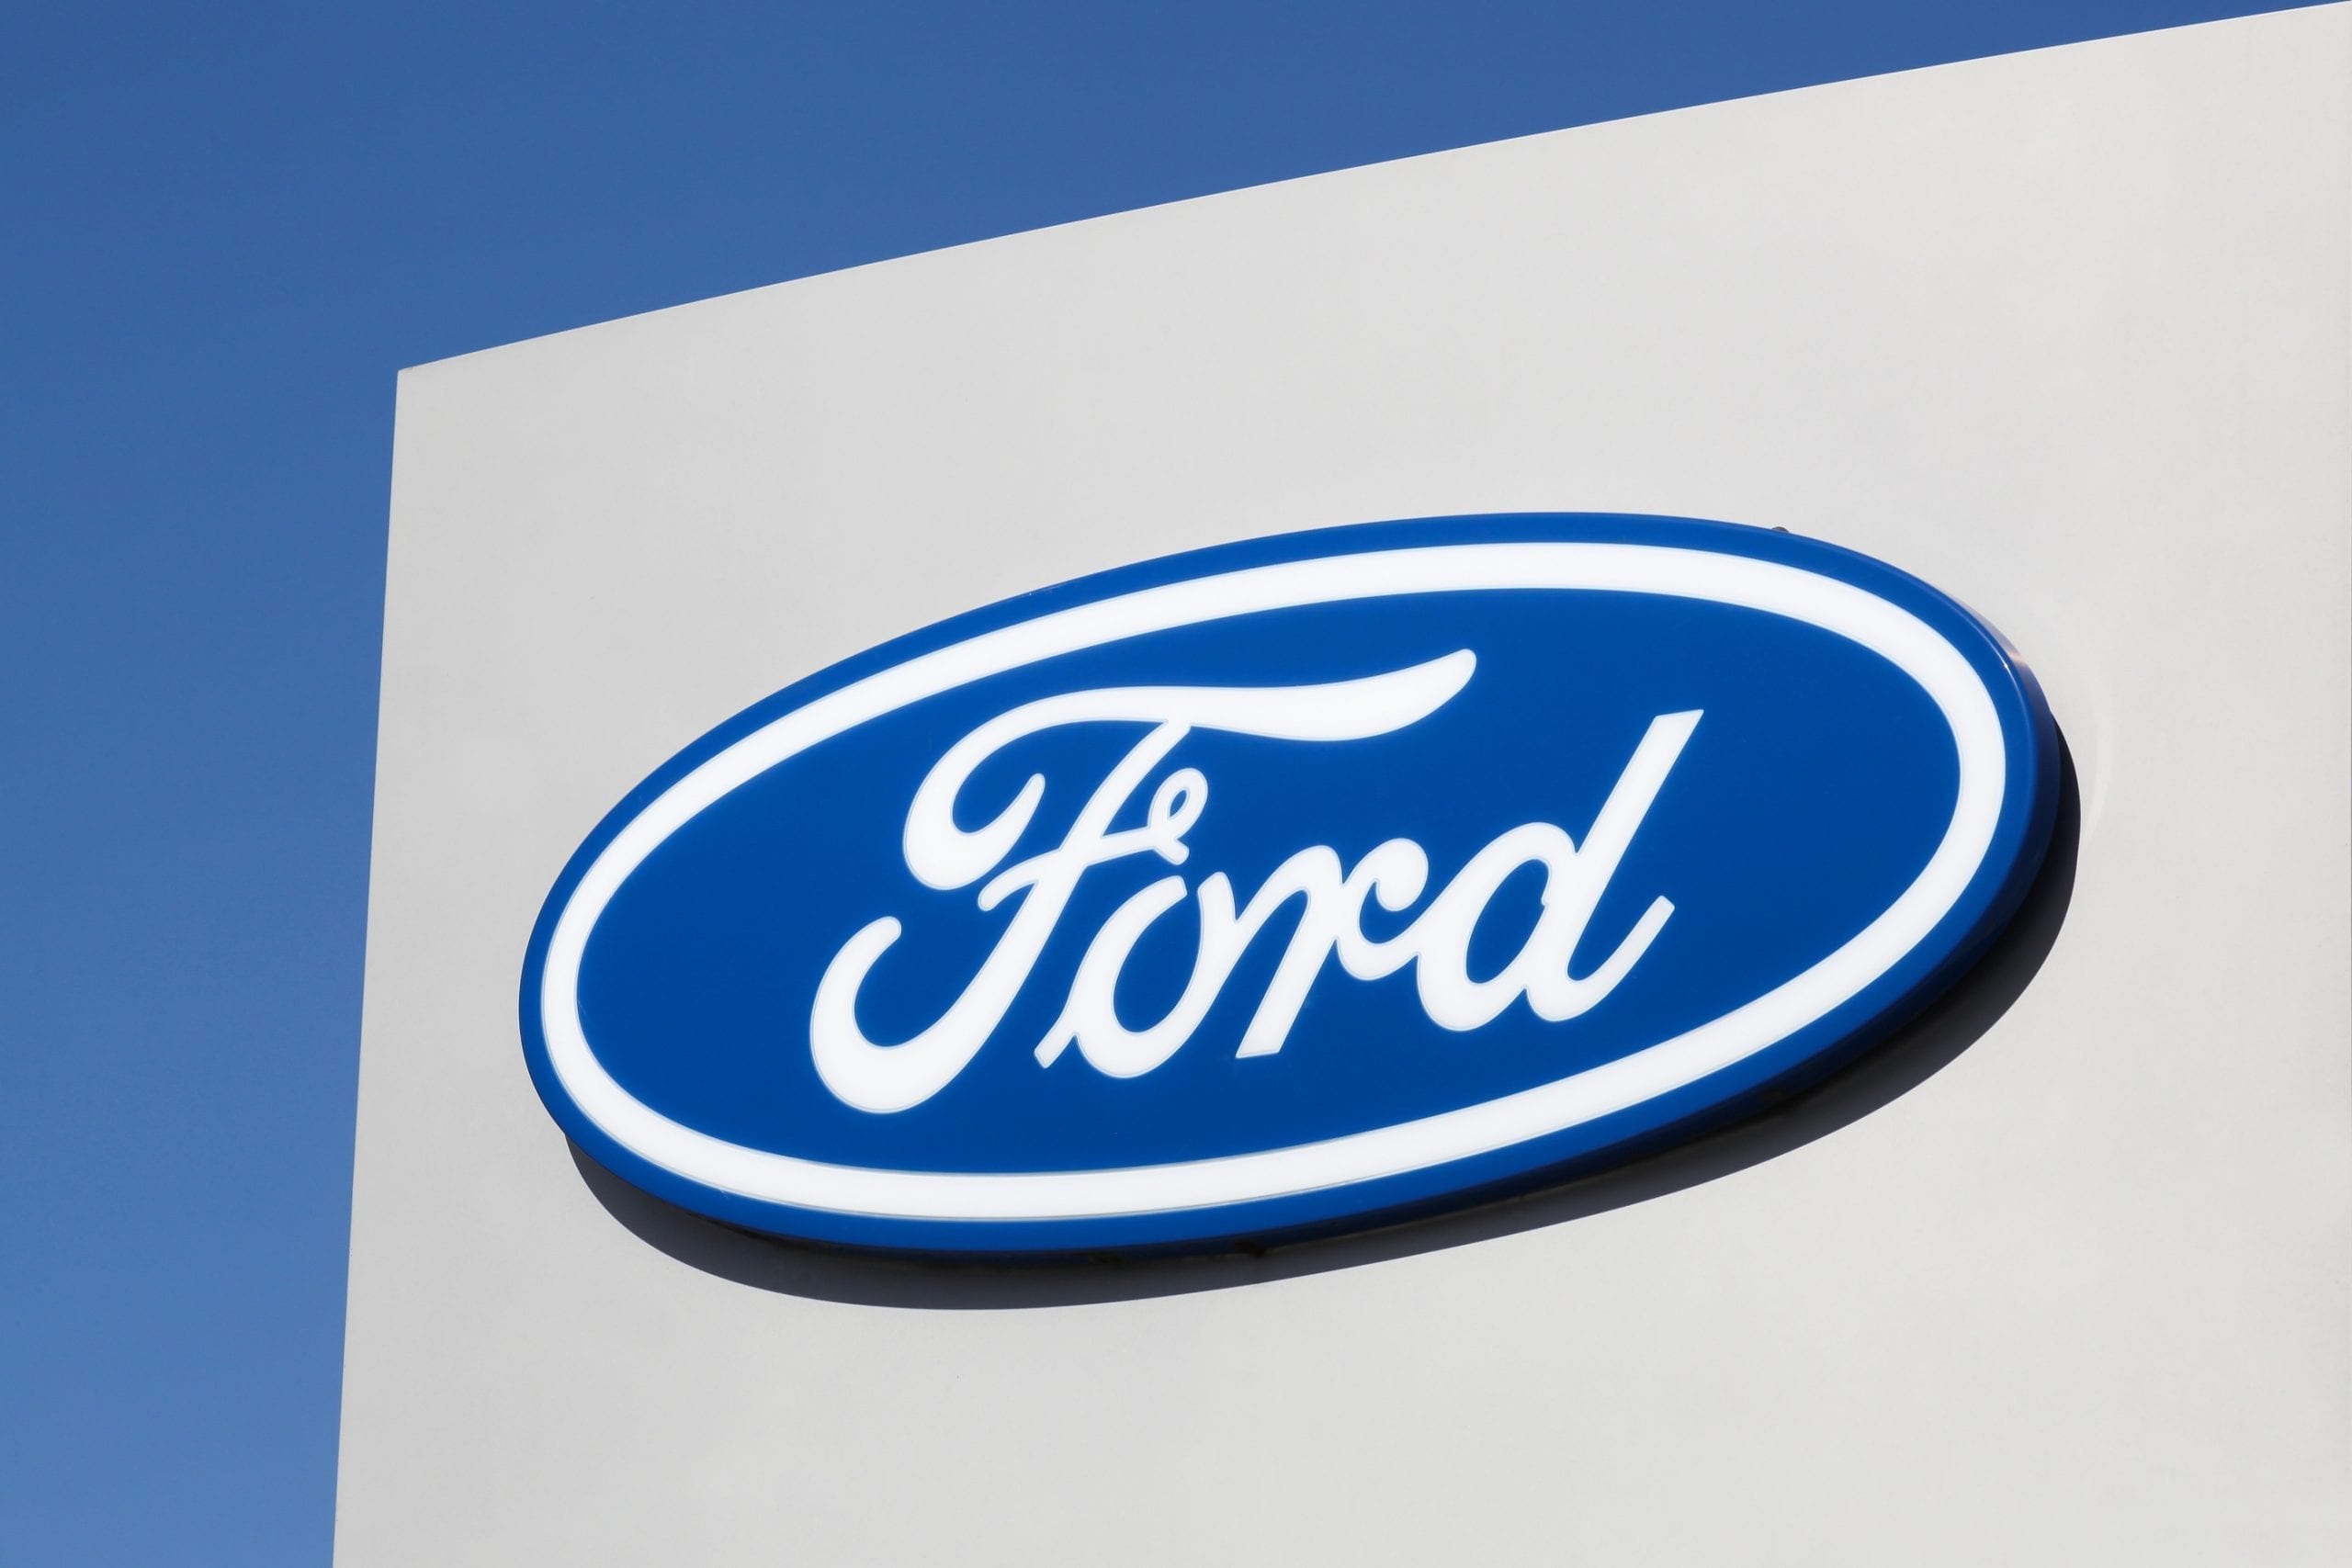 Ford to Recall 3 Million Vehicles Equipped with Faulty Takata Airbags After Losing Fight with Federal Agency